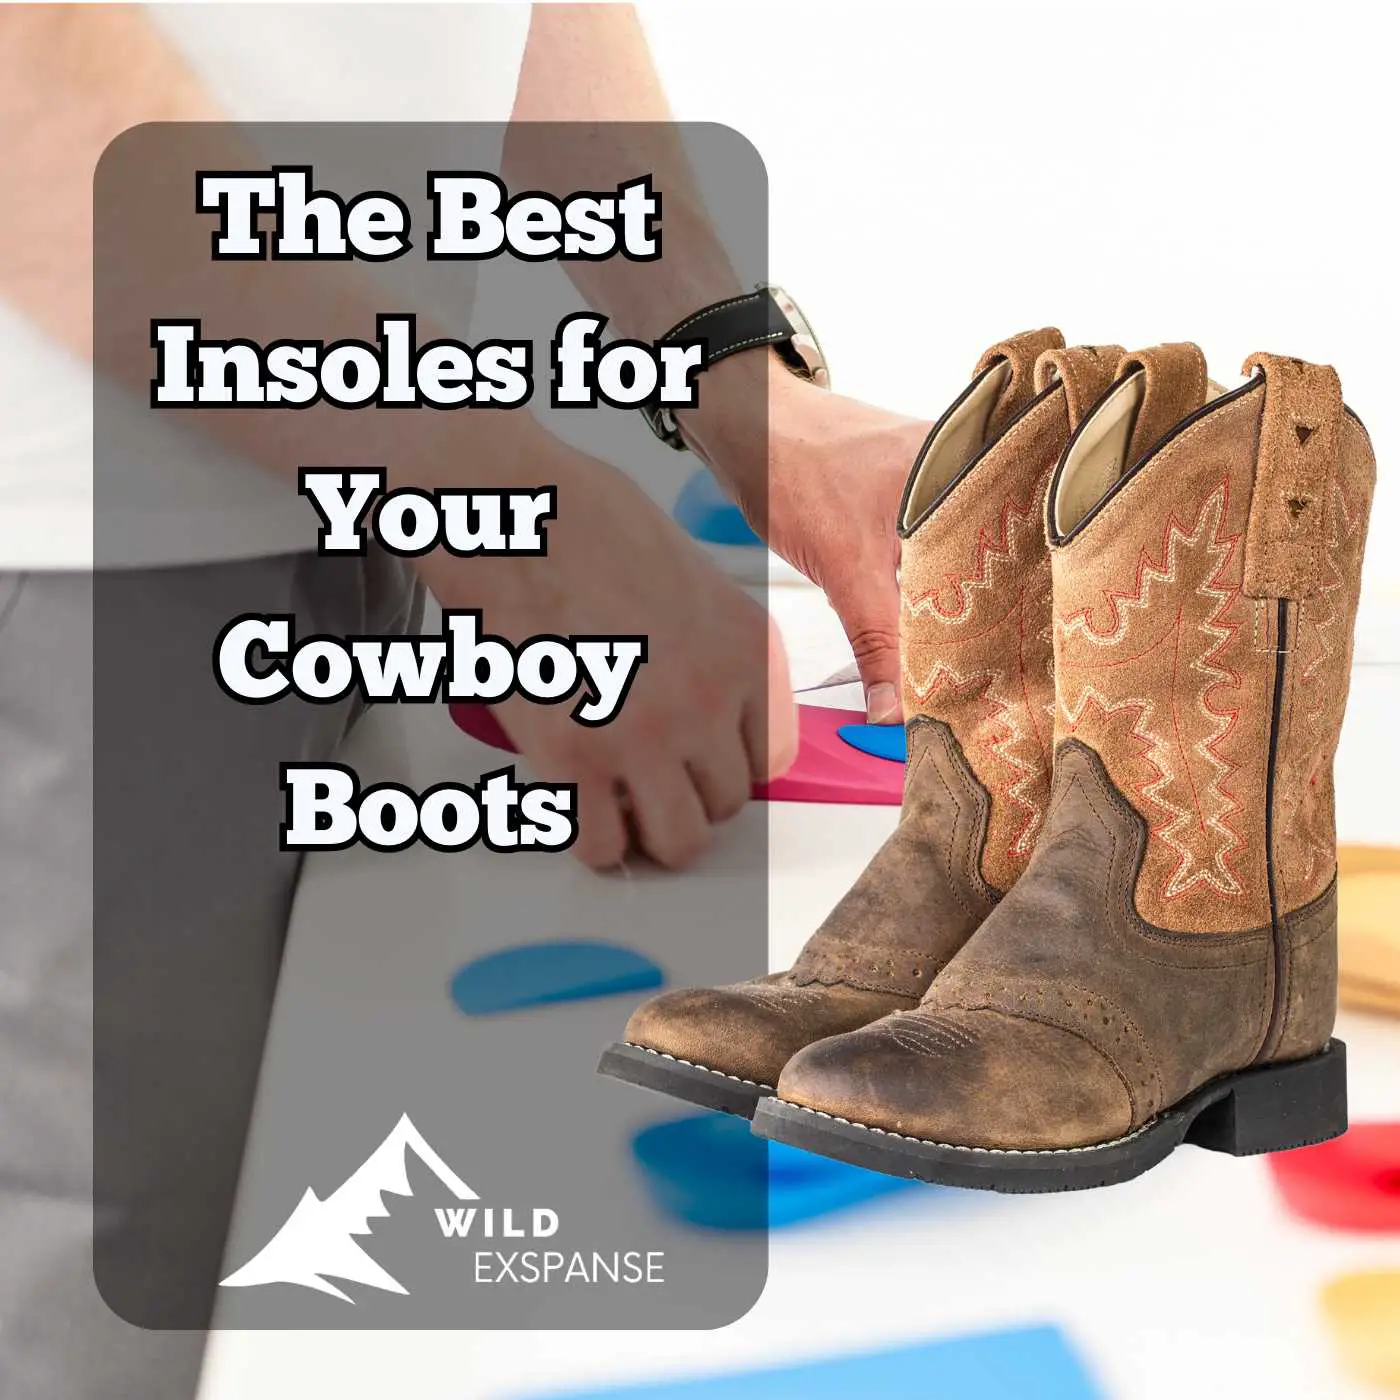 The Best Insoles for Your Cowboy Boots - wildexpanse.com